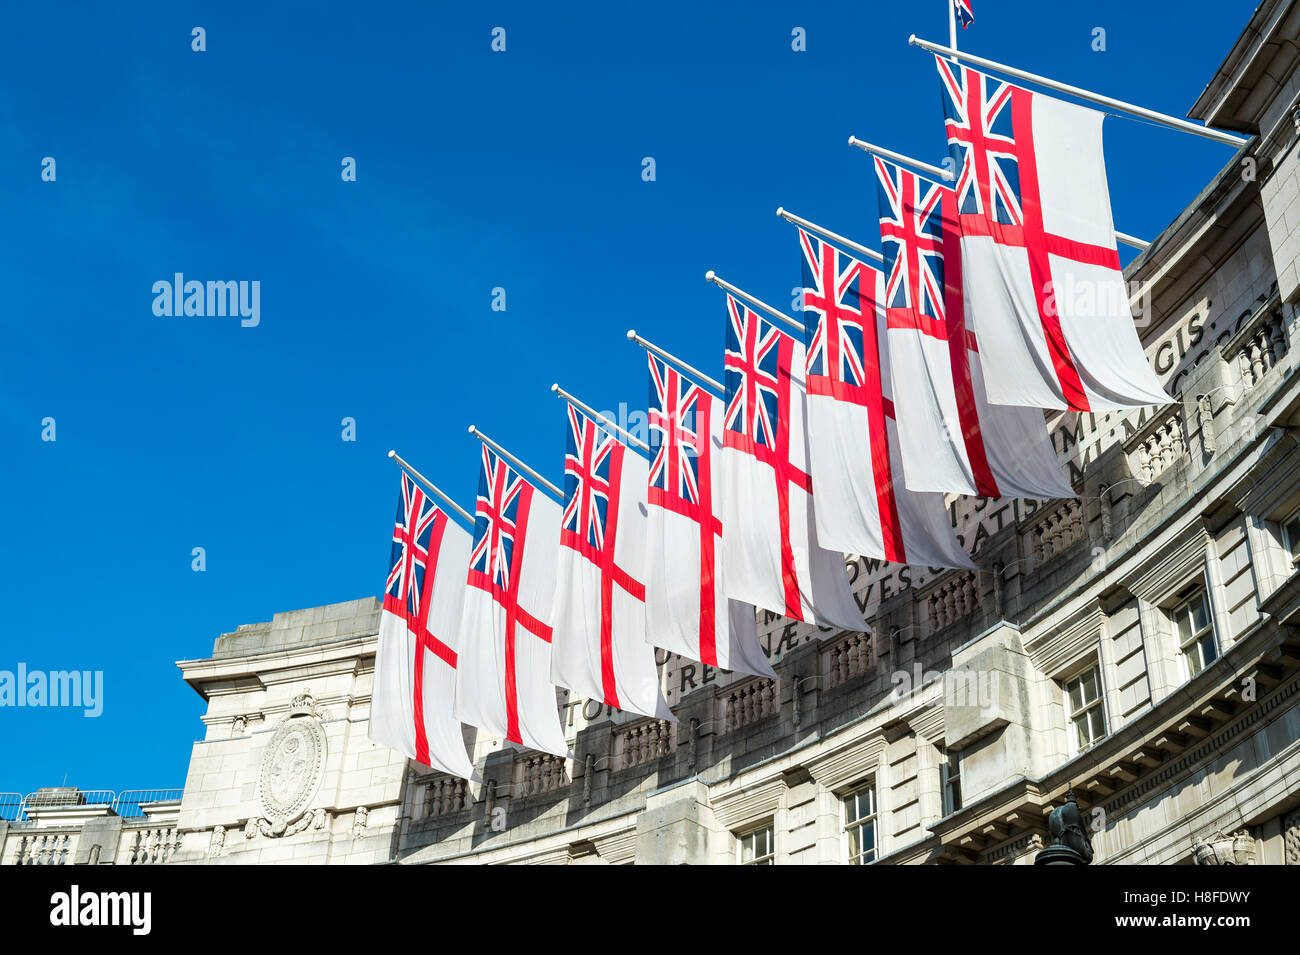 Traditional white ensign flags fly on Admiralty Arch, the ceremonial gateway between Trafalgar Square and The Mall in London, UK Stock Photo